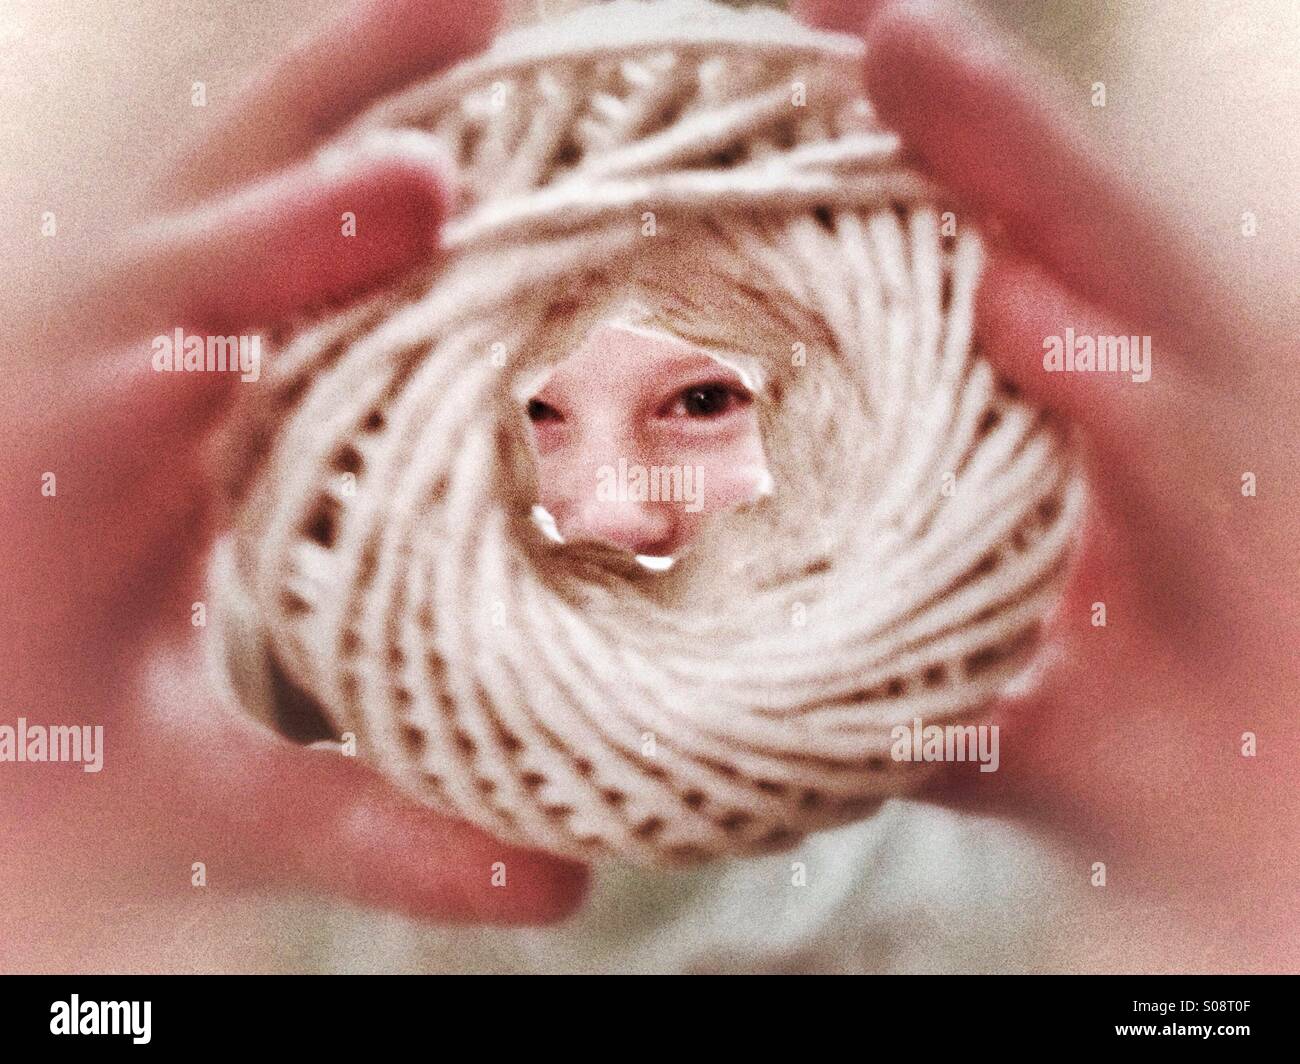 Roll of string Stock Photo - Alamy